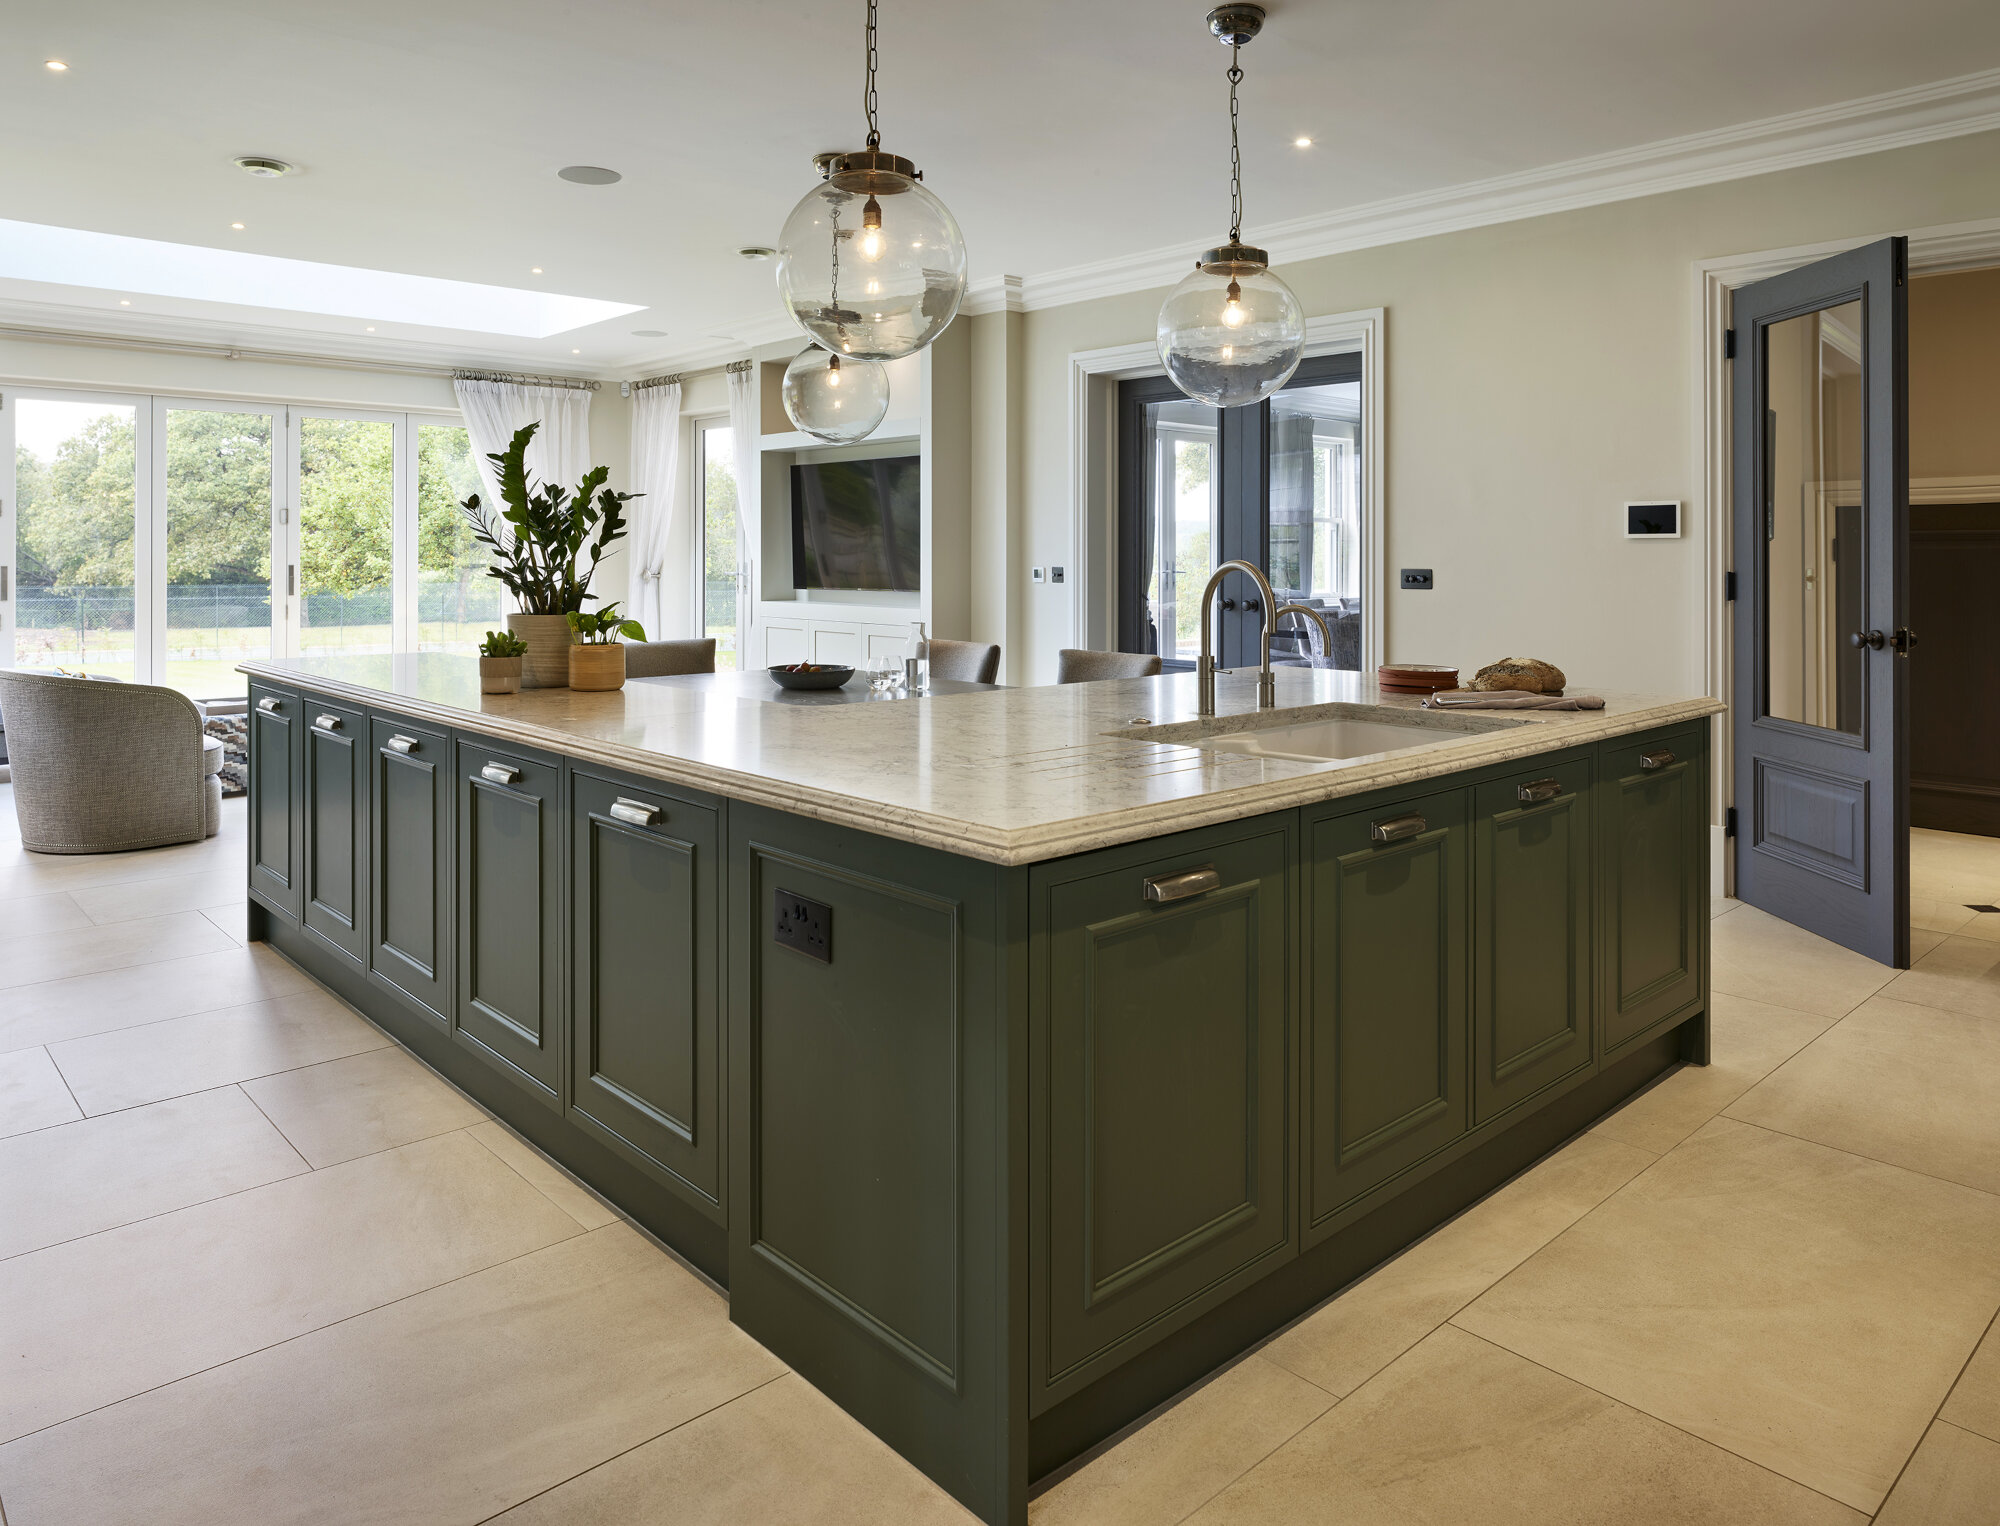 High End traditional Kitchens In Earl Shilton